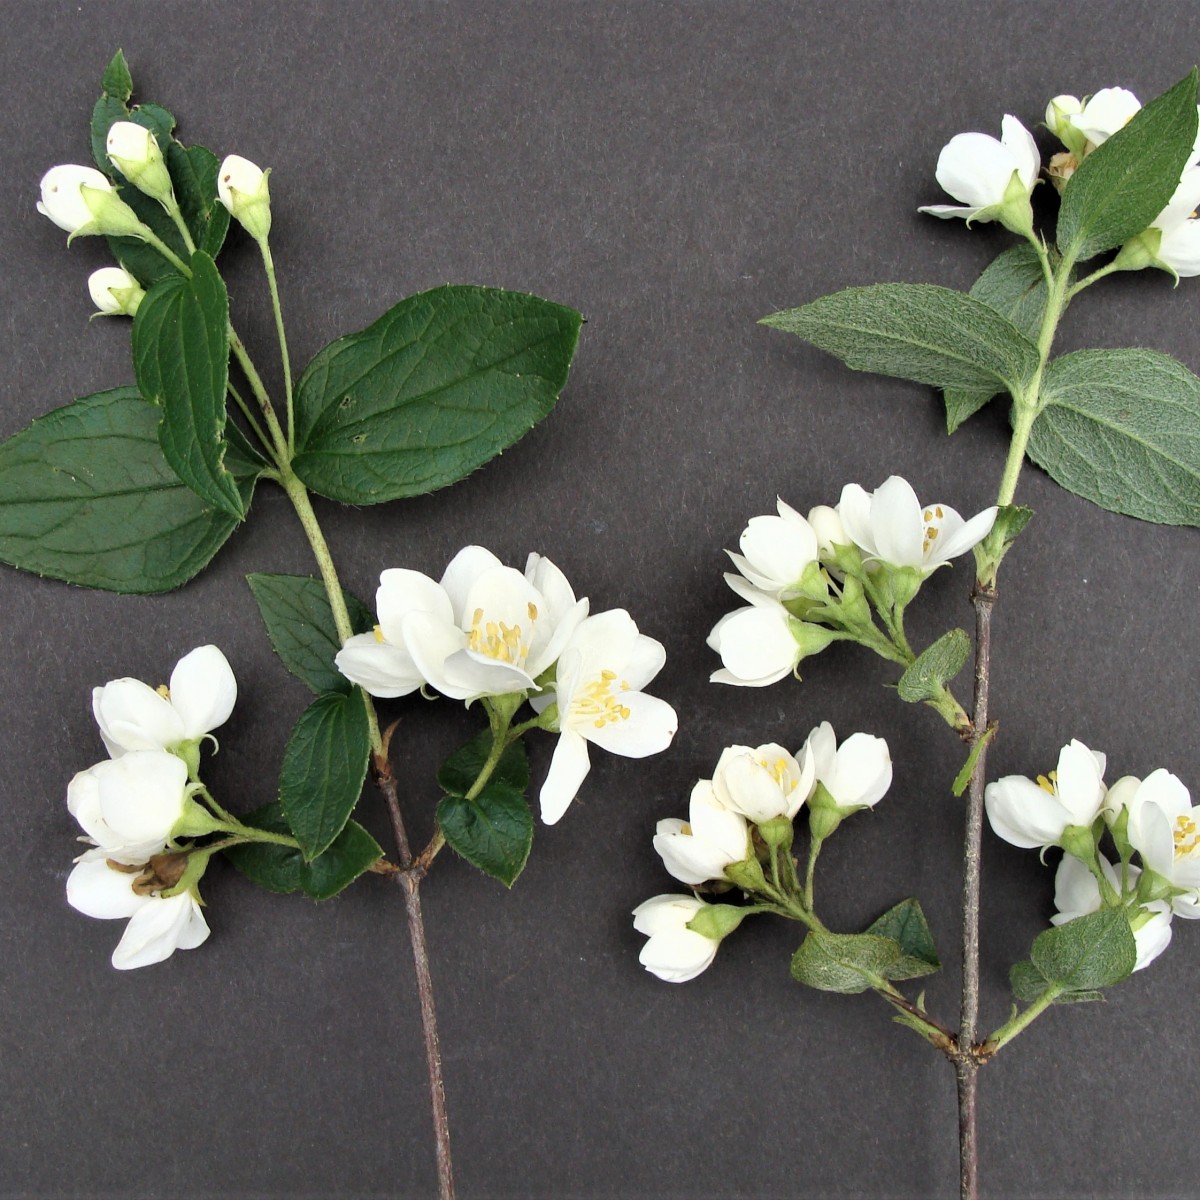 Know Your Natives – Hairy Mock Orange